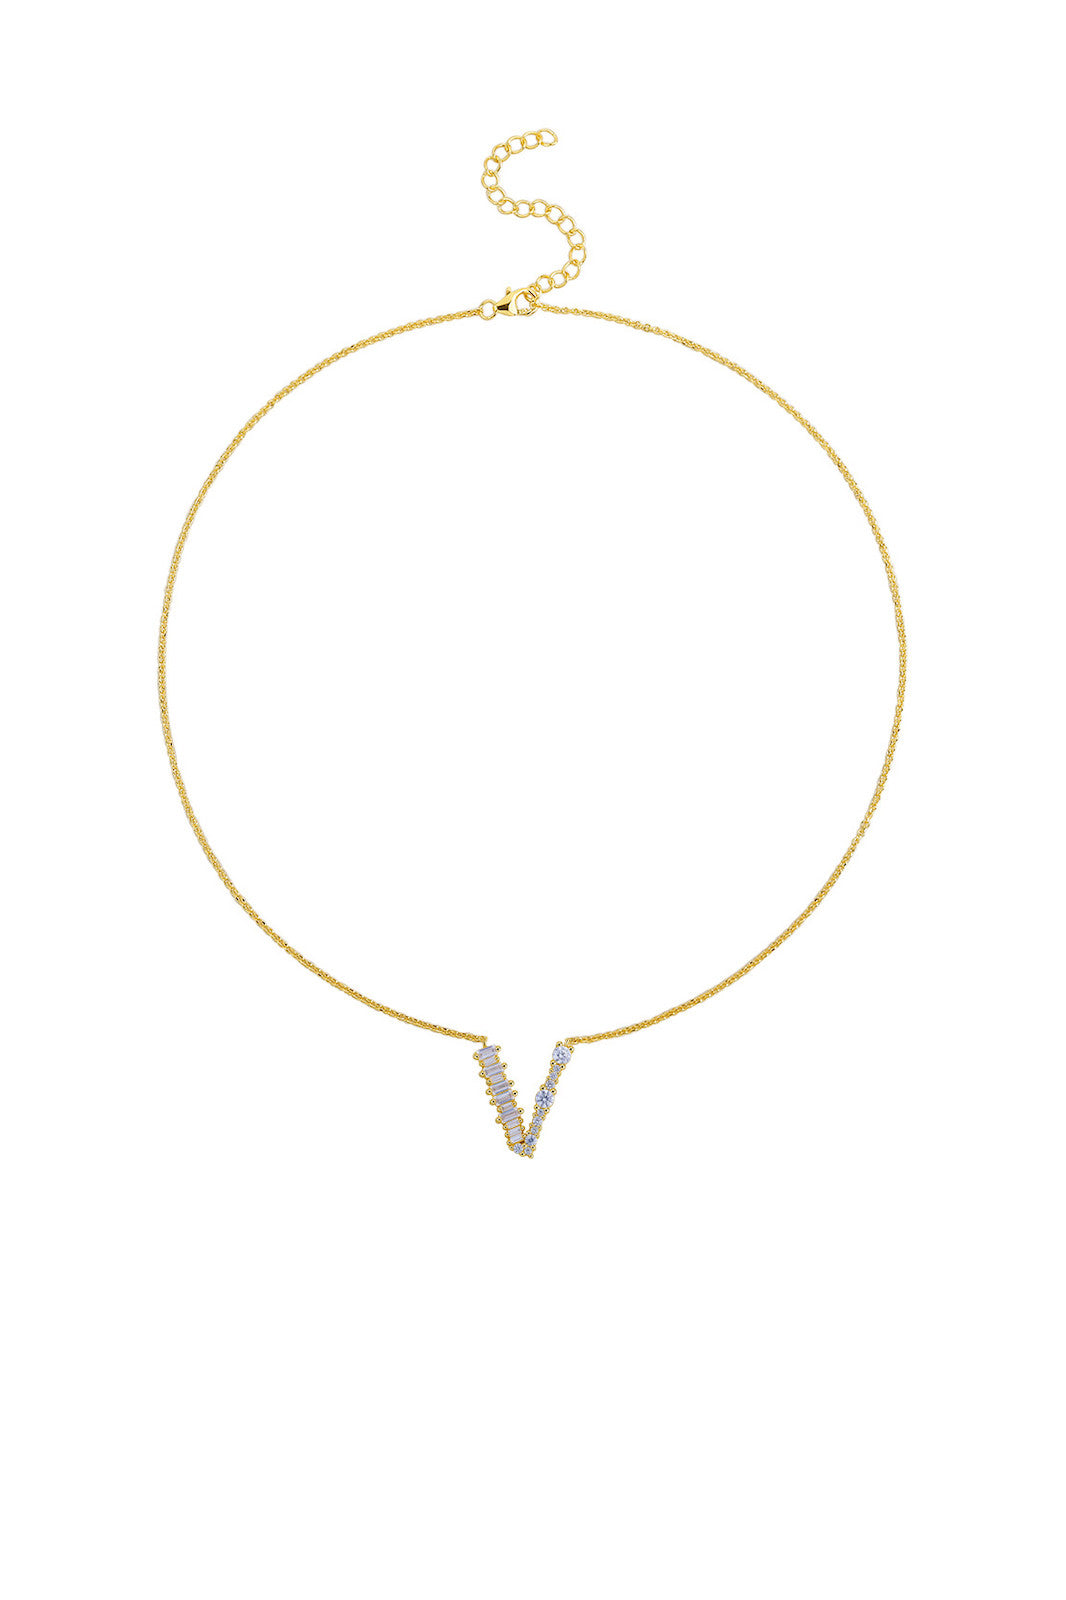 THE V FASHION JEWELLERY COLLECTION - News | LOUISVUITTON